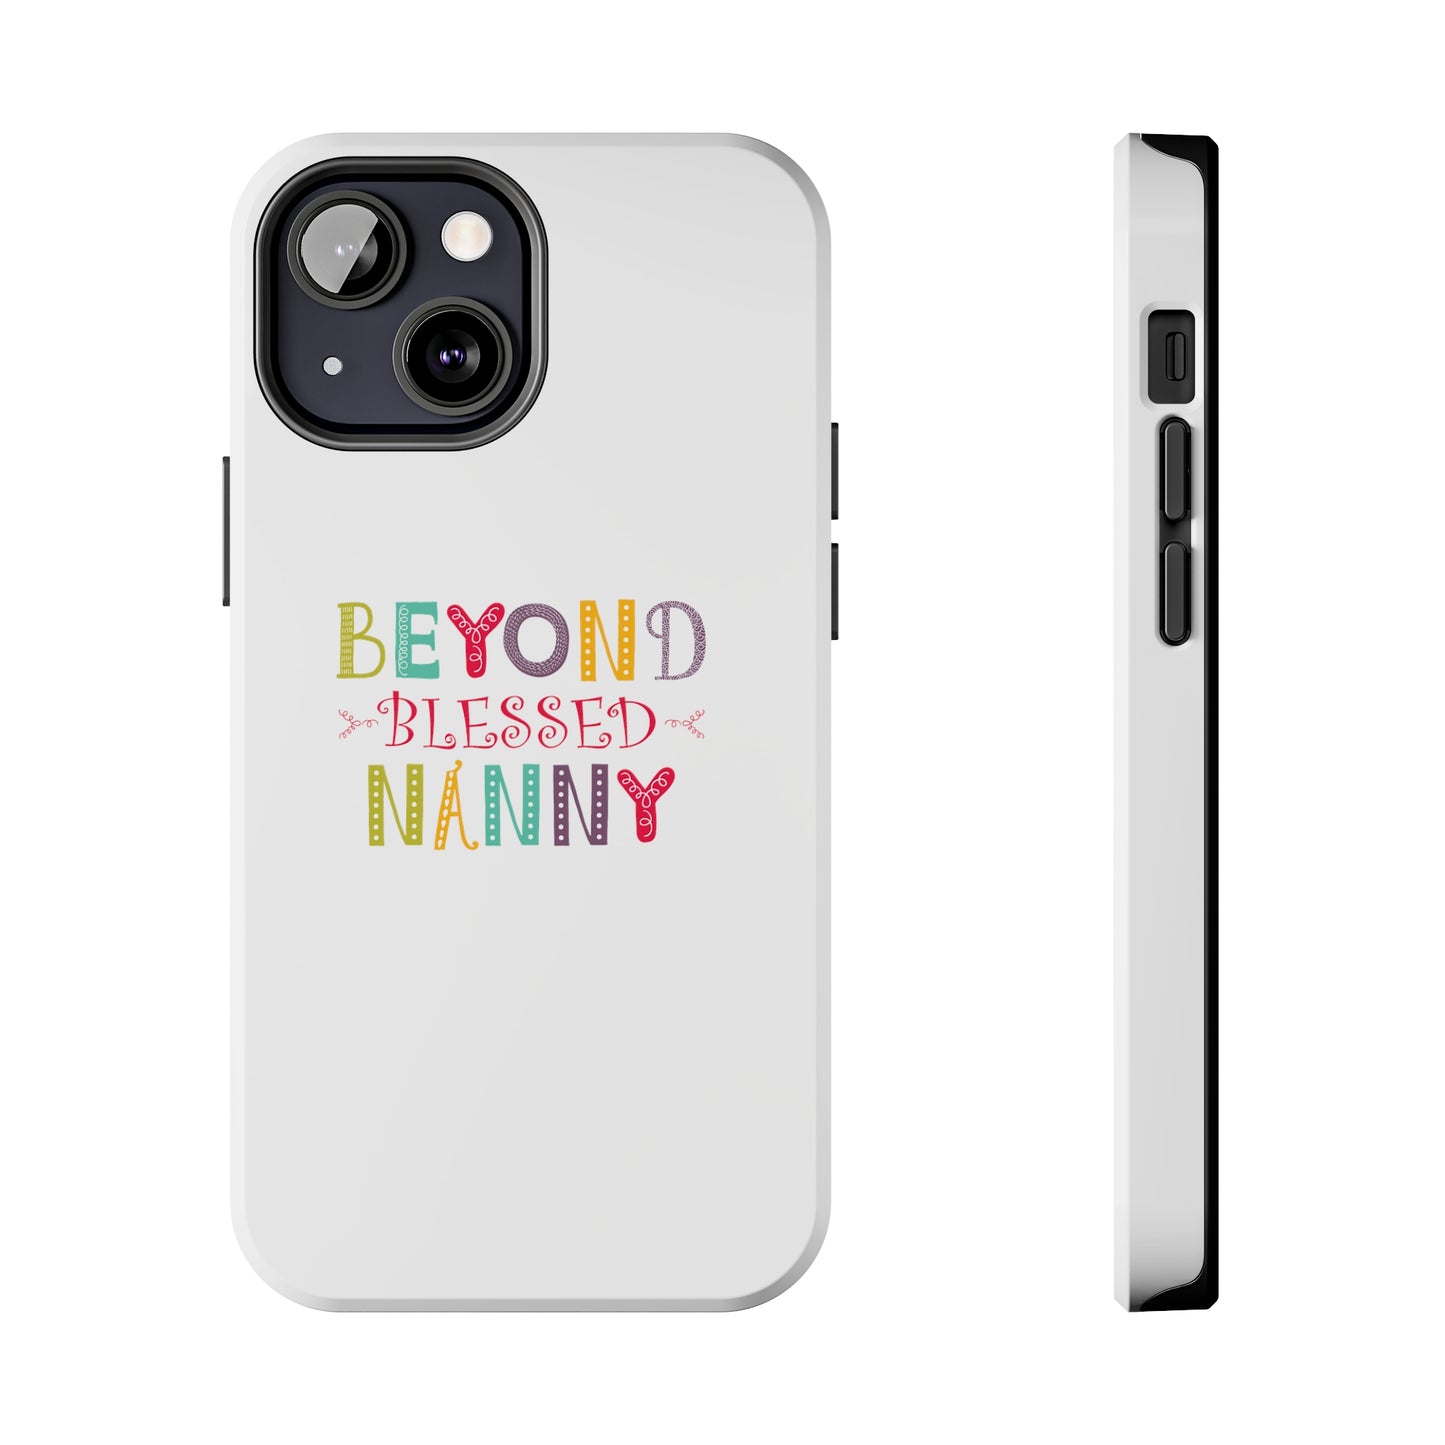 Beyond Blessed Nanny - Playful - Tough Phone Cases